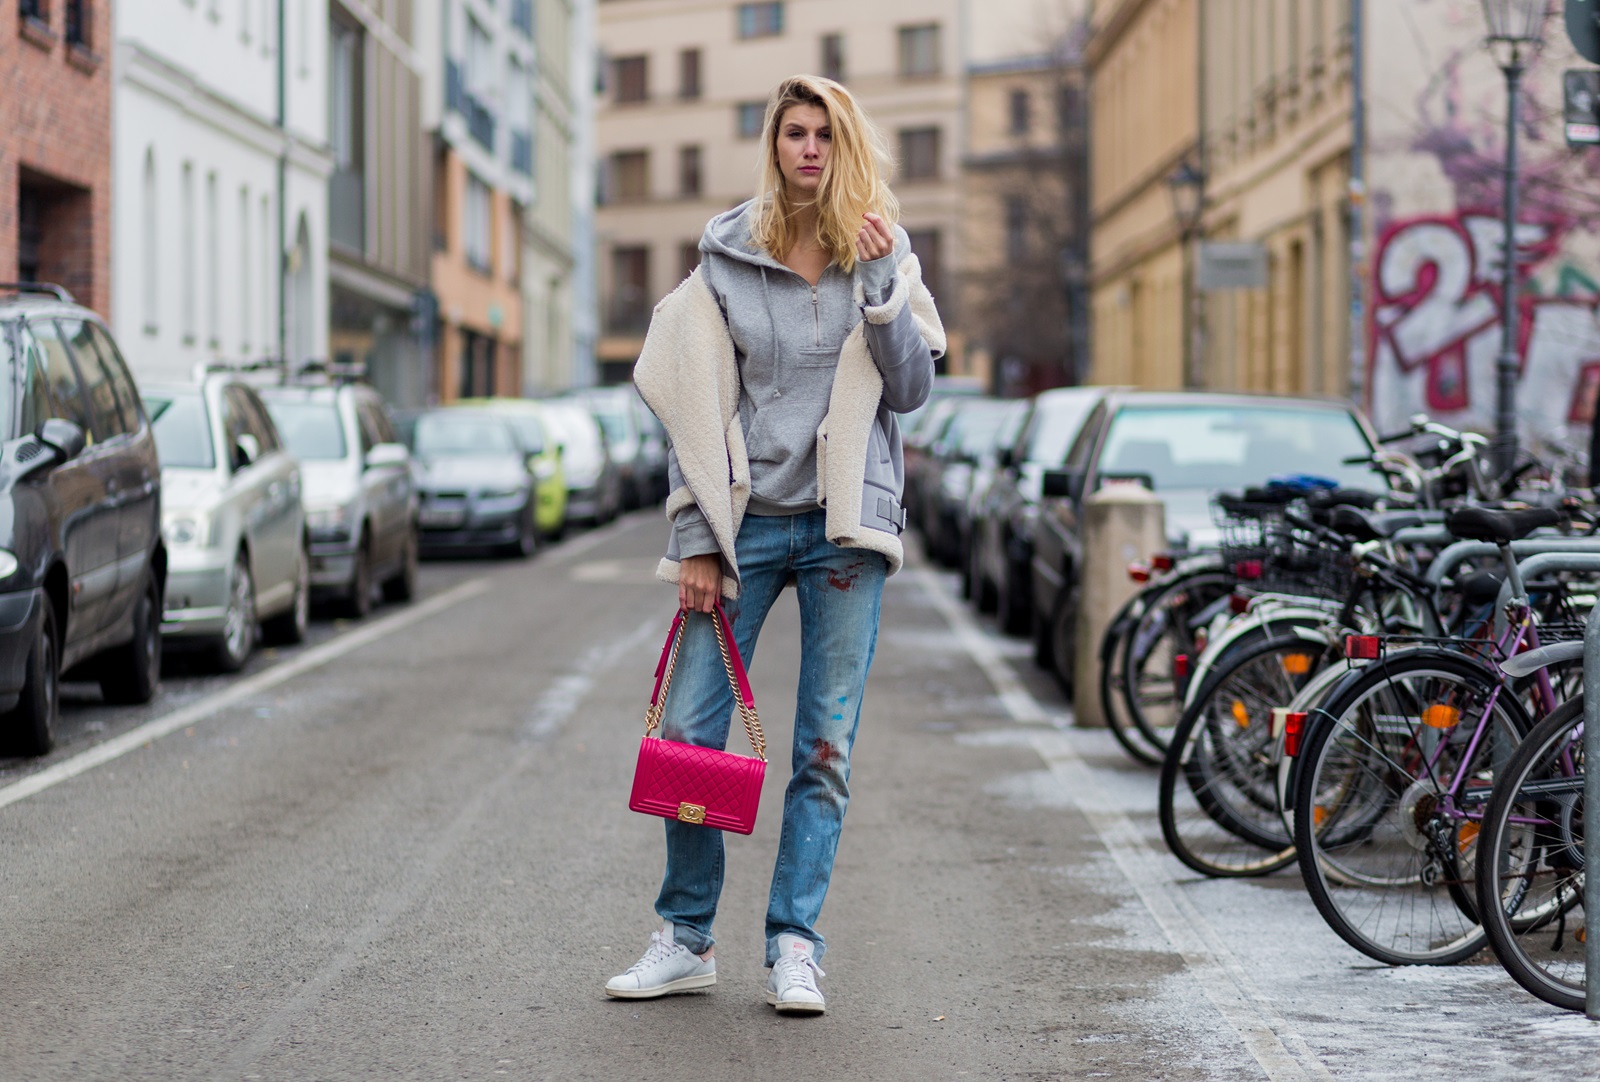 BERLIN, GERMANY - JANUARY 19: Kimyana Hachmann wearing Dior denim jeans, pink Chanel bag, Adidas Stan Smith sneaker, Zara jacket, Dolce & Gabbana hoody, during the Mercedes-Benz Fashion Week Berlin A/W 2017 at Kaufhaus Jandorf on January 19, 2017 in Berlin, Germany. (Photo by Christian Vierig/Getty Images) *** Local Caption *** Kimyana Hachmann